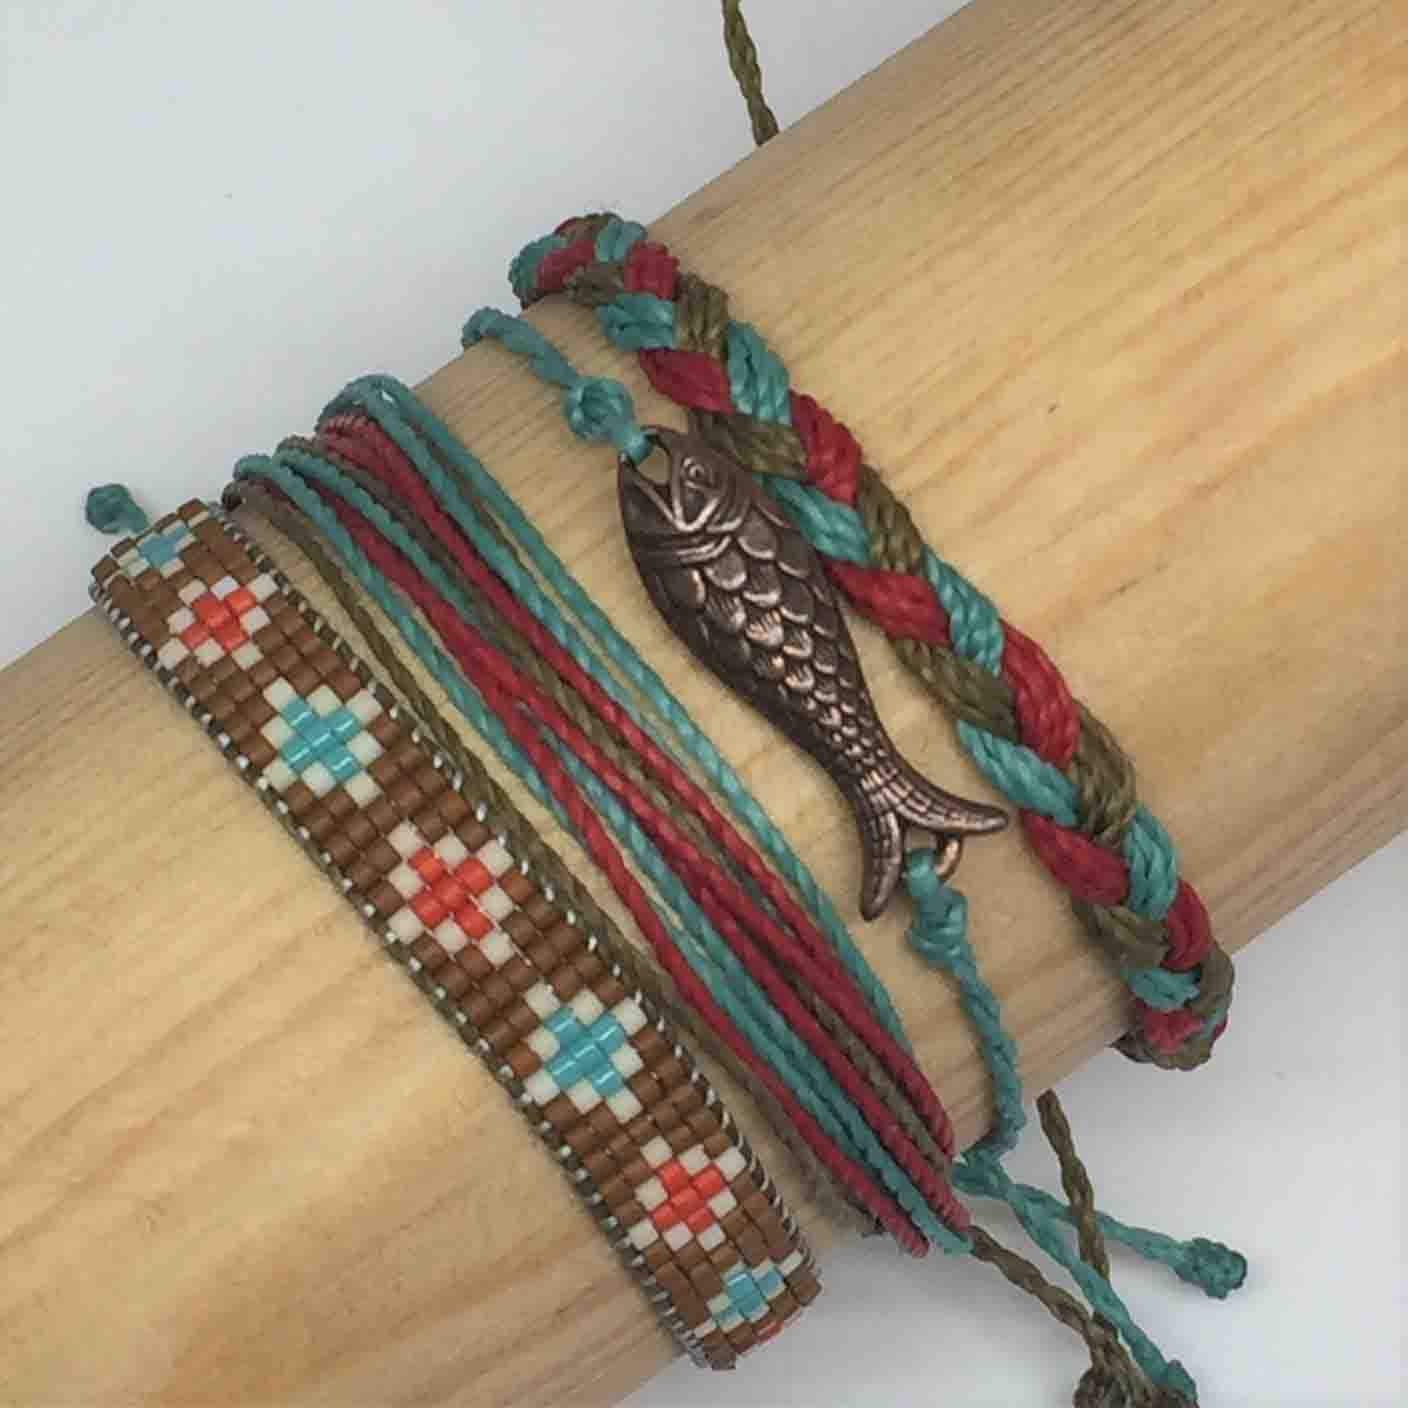 Fire and Ice pair of Friendship Bracelets